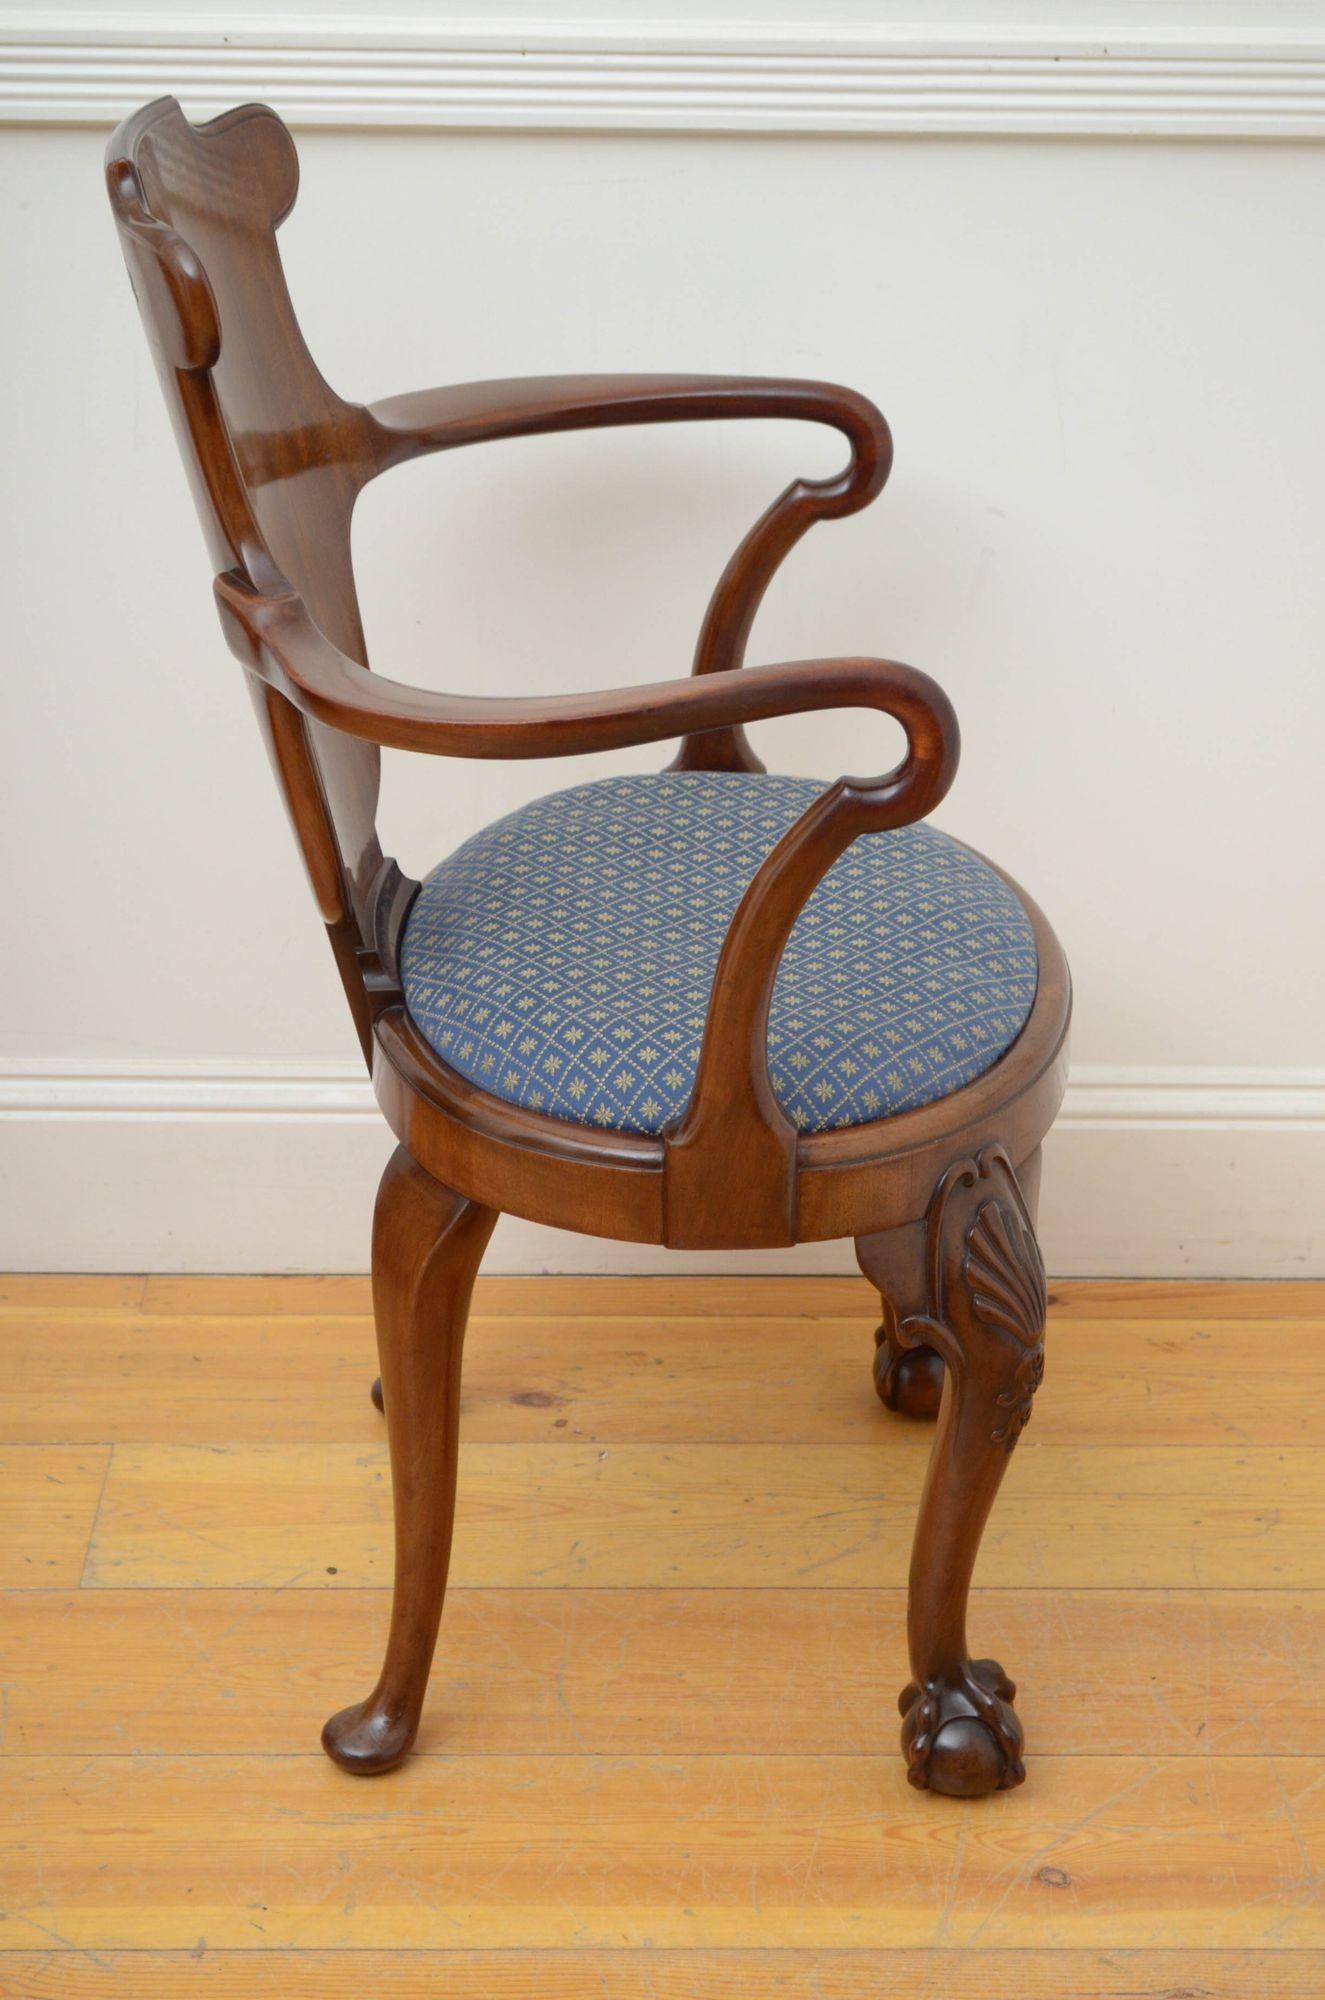 Early 20th century Gillows Design Chair in Mahogany For Sale 8